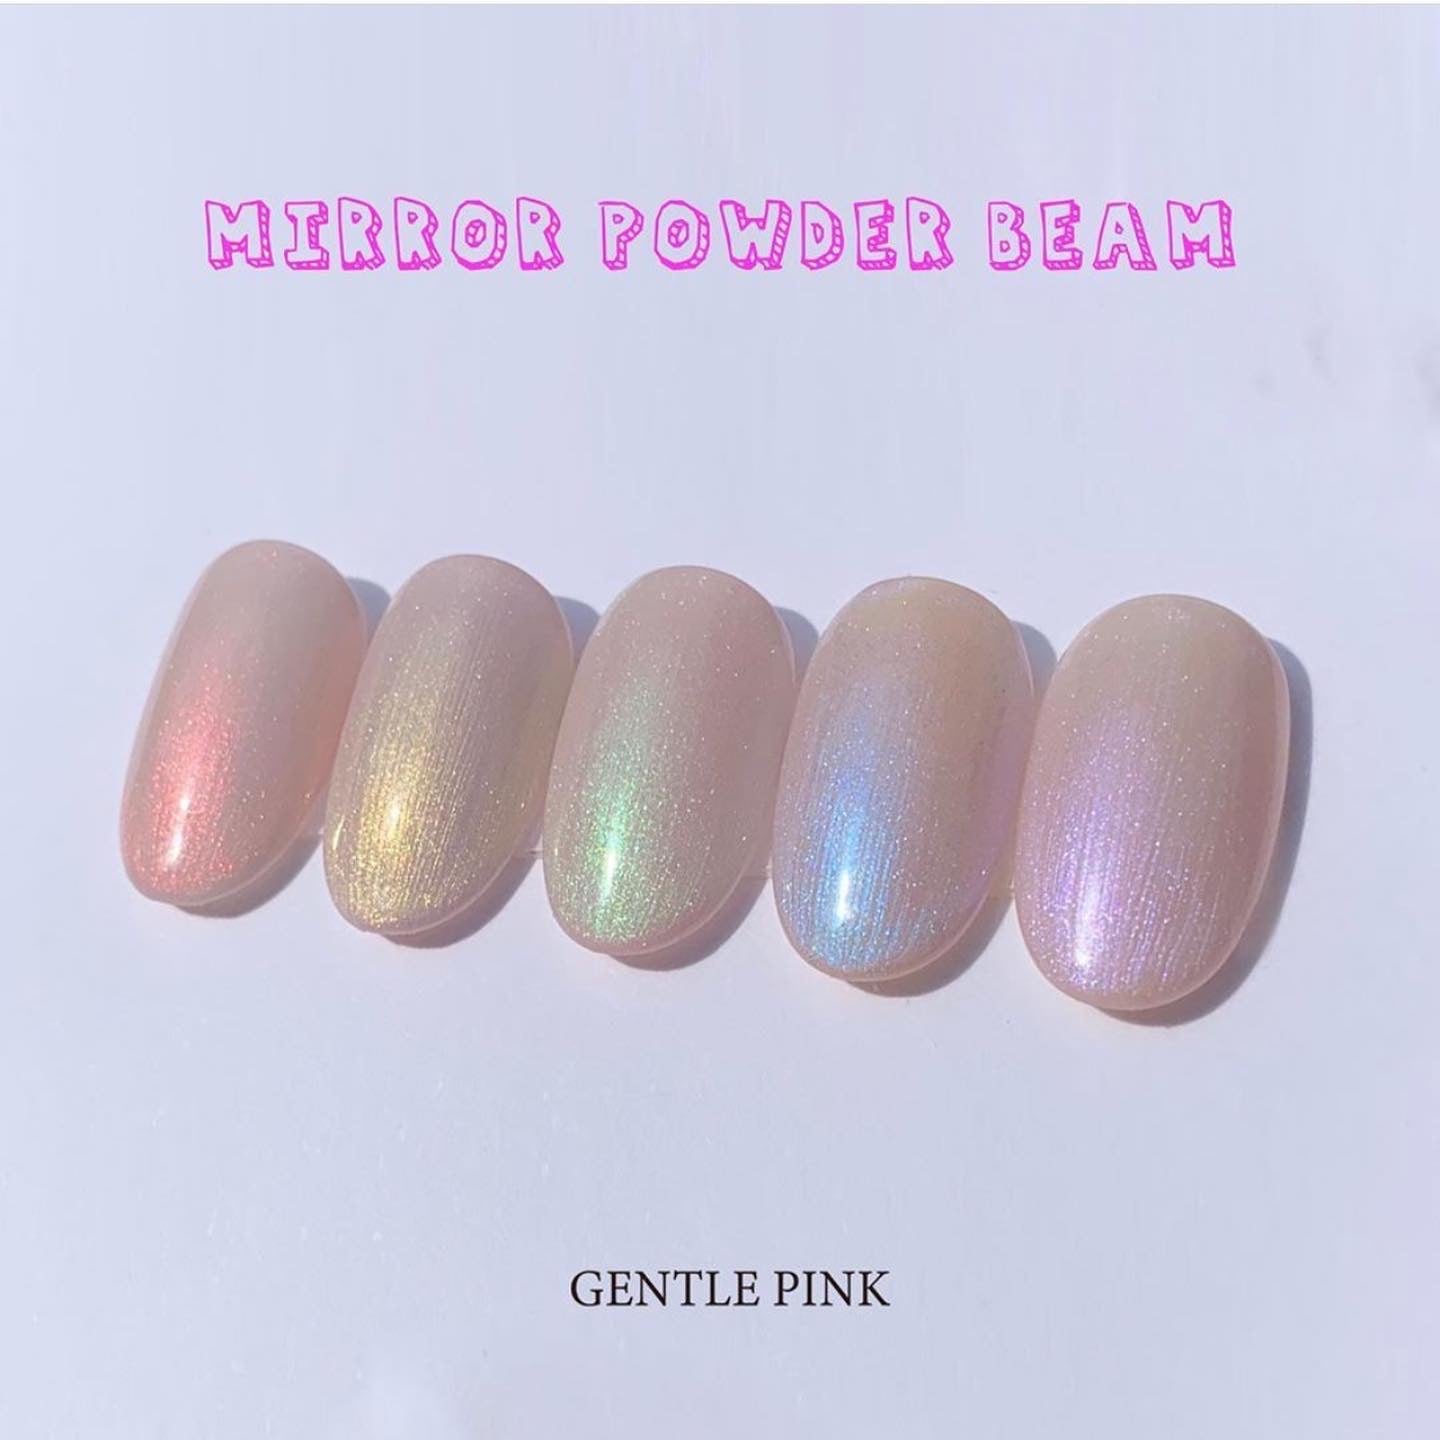 Vibrant Beauty - ✨PINK SPARKLES✨ Bright sparkly toes are a must for summer!  Here we have Gelish 'Make you blink pink' with Magpie Glitter ' Emma'.  Picture does not do this colour